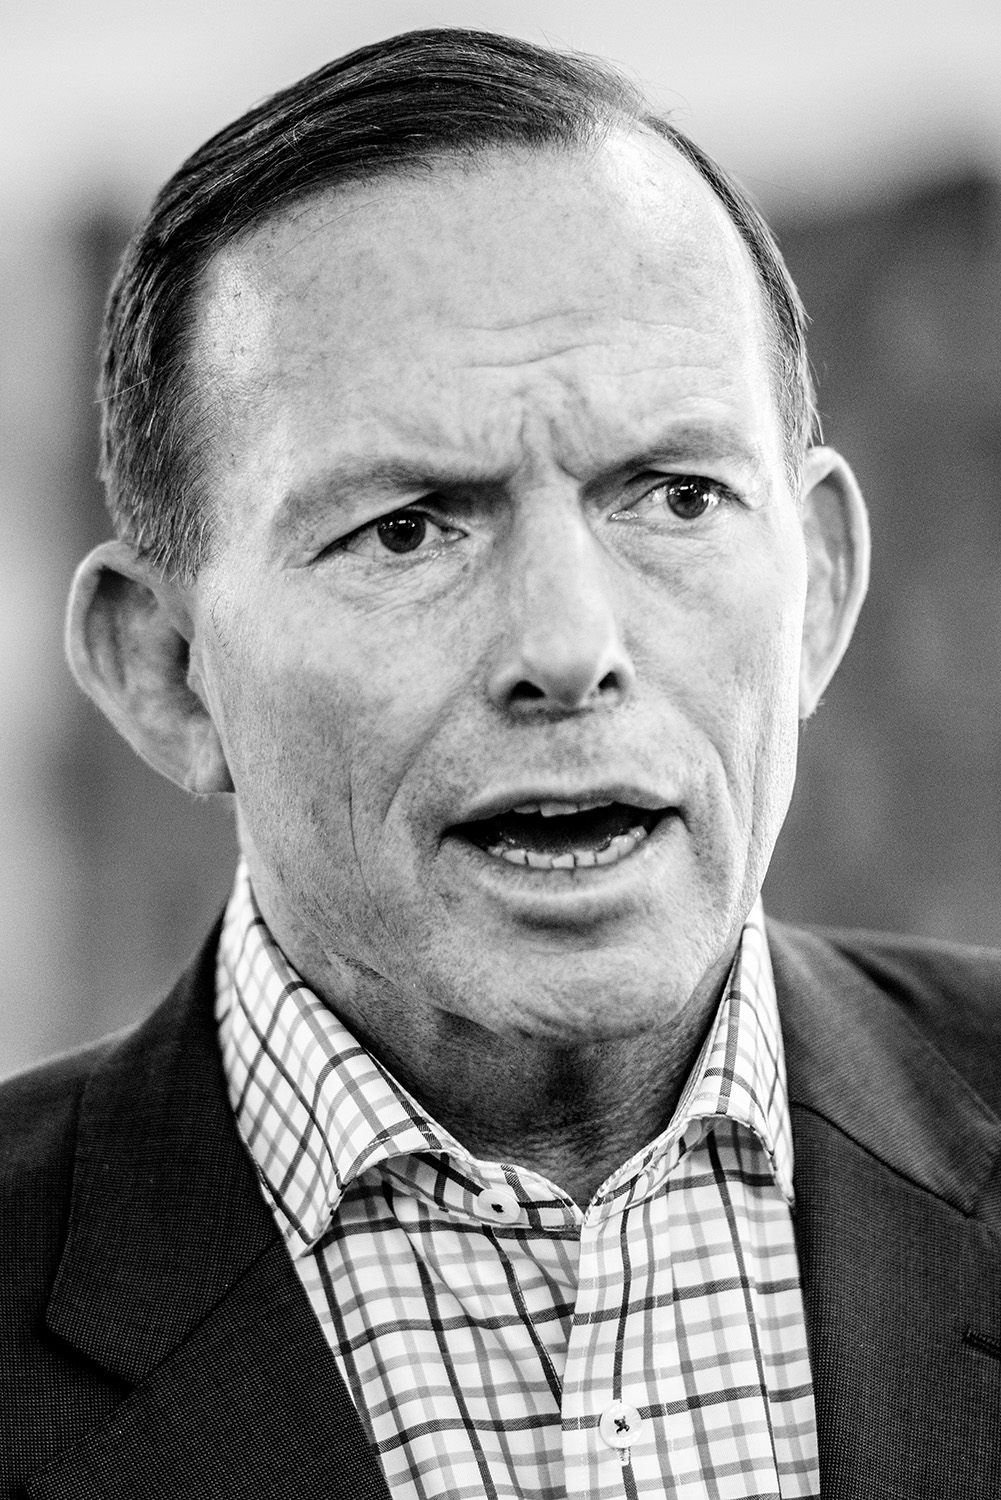 image of AARONTAIT COPYRIGHTED 2014 159 CORPORATE BUSINESS EXECUTIVES POWER COMMERCE DOCUMENTARY REPORTAGE TONY ABBOTT PRIME MINISTER AUSTRALIA BLACK AND WHITE BW DOORSTOP